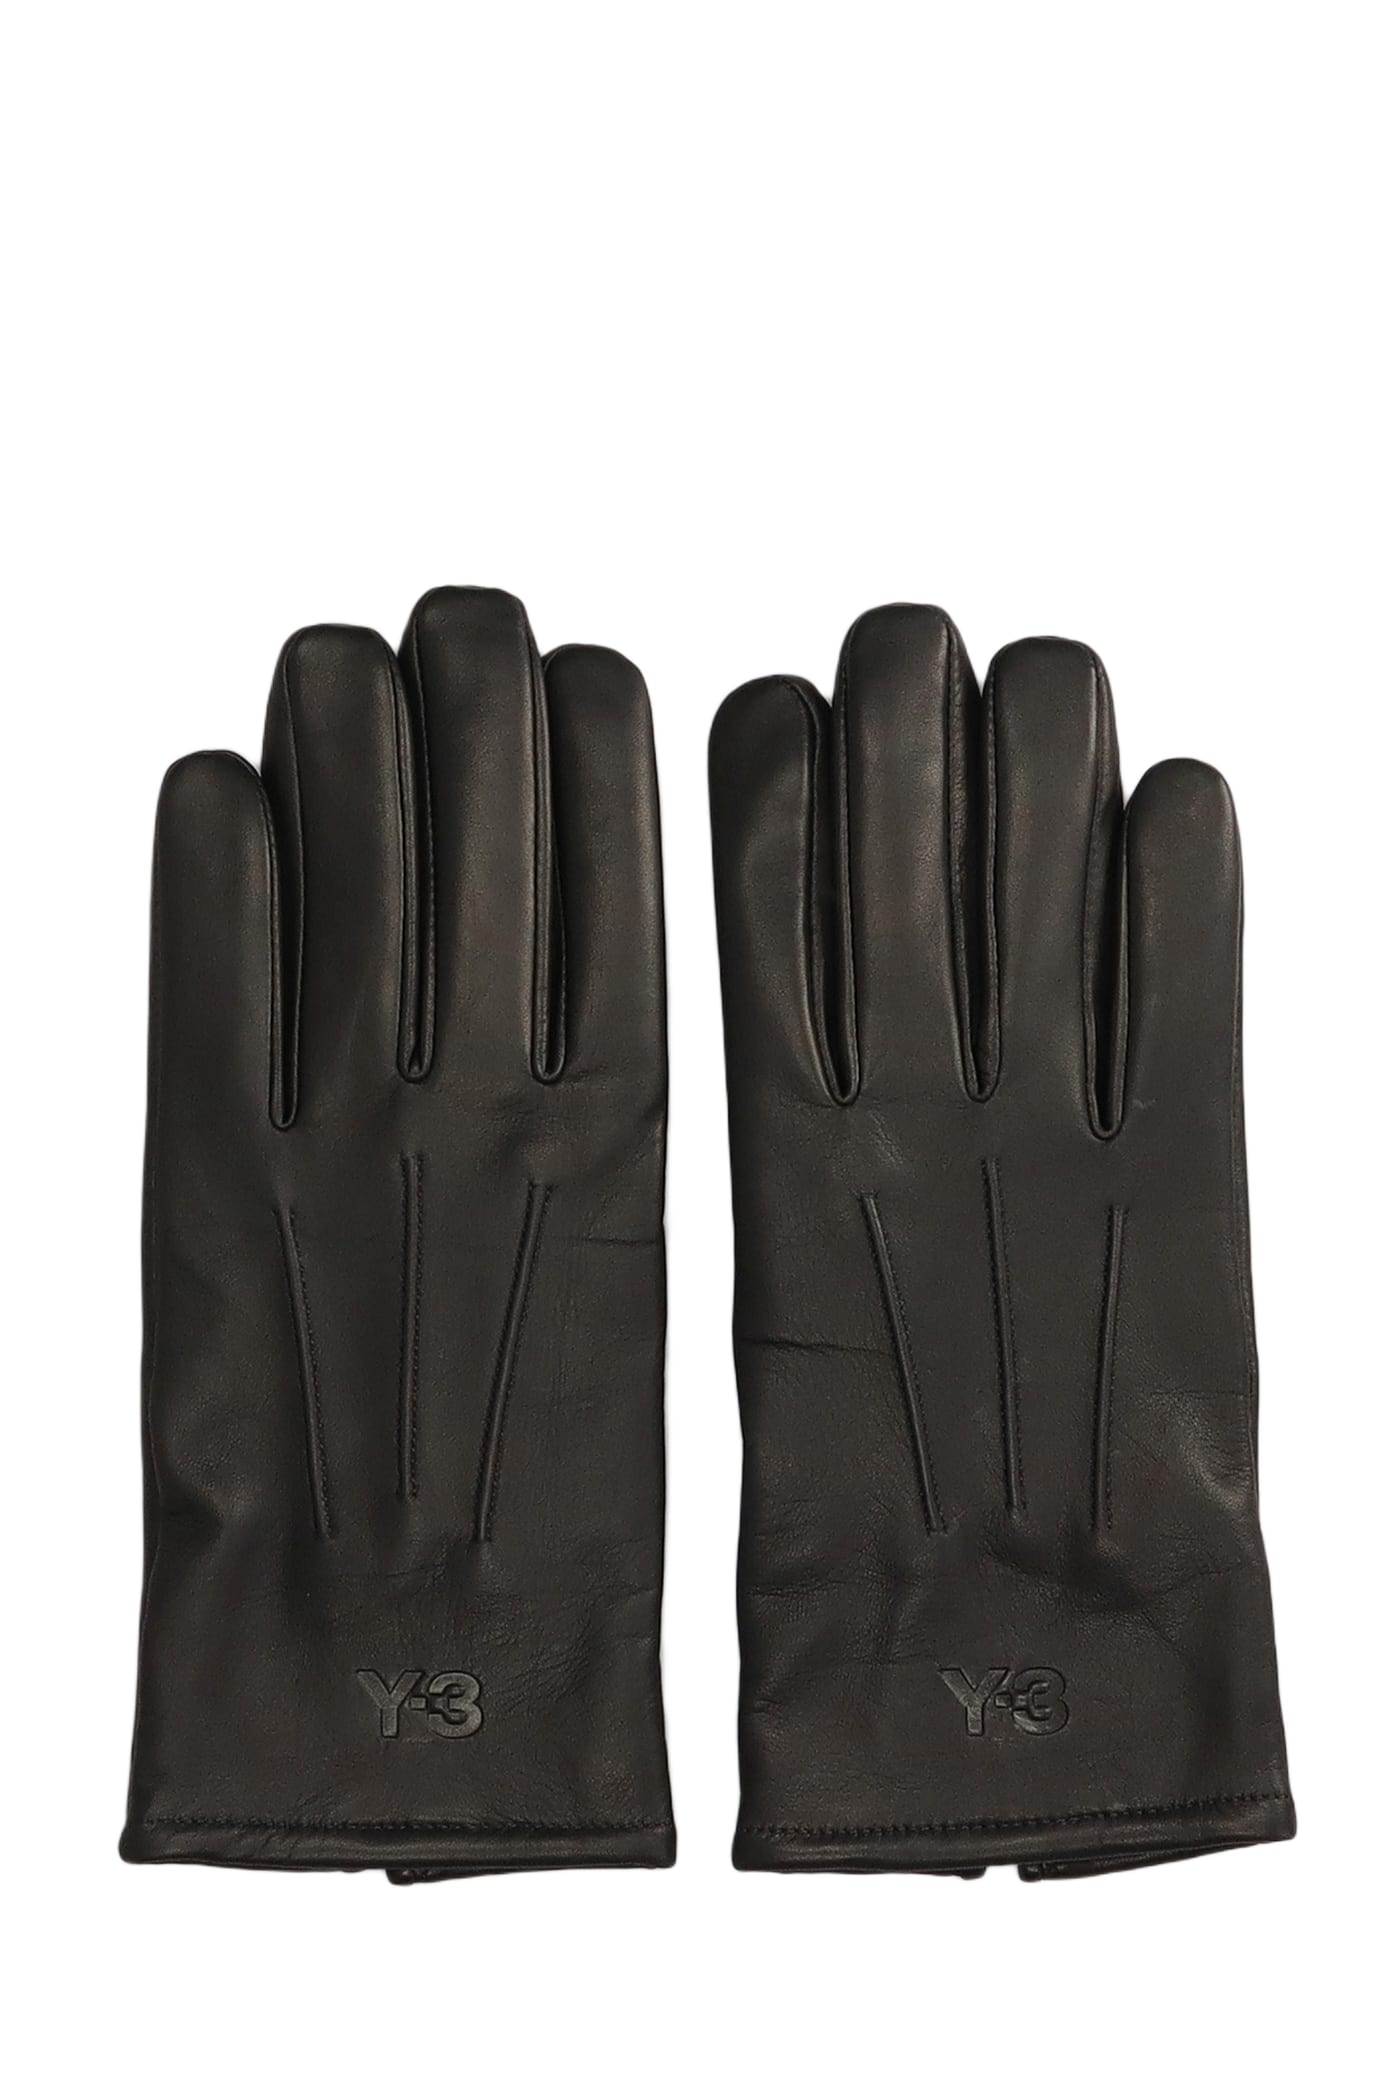 Y-3 Gloves In Black Leather | italist